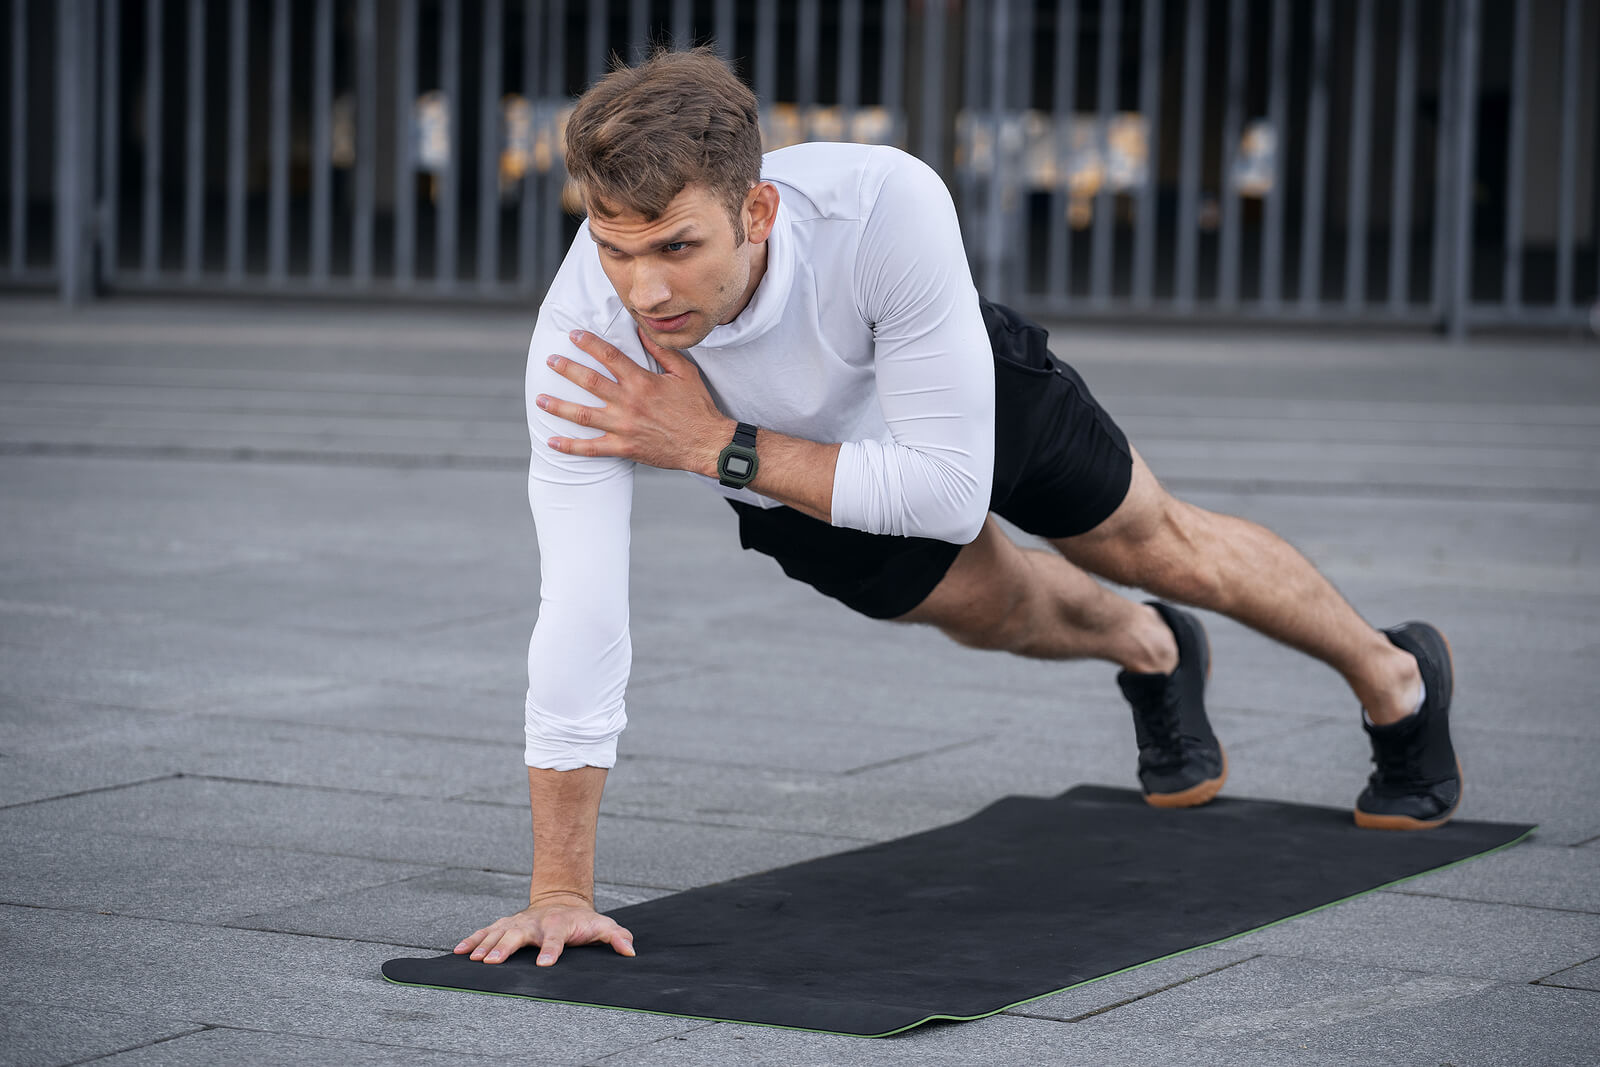 Focused Man In Sportswear Doing Shoulder Tap In Push Or Press Up